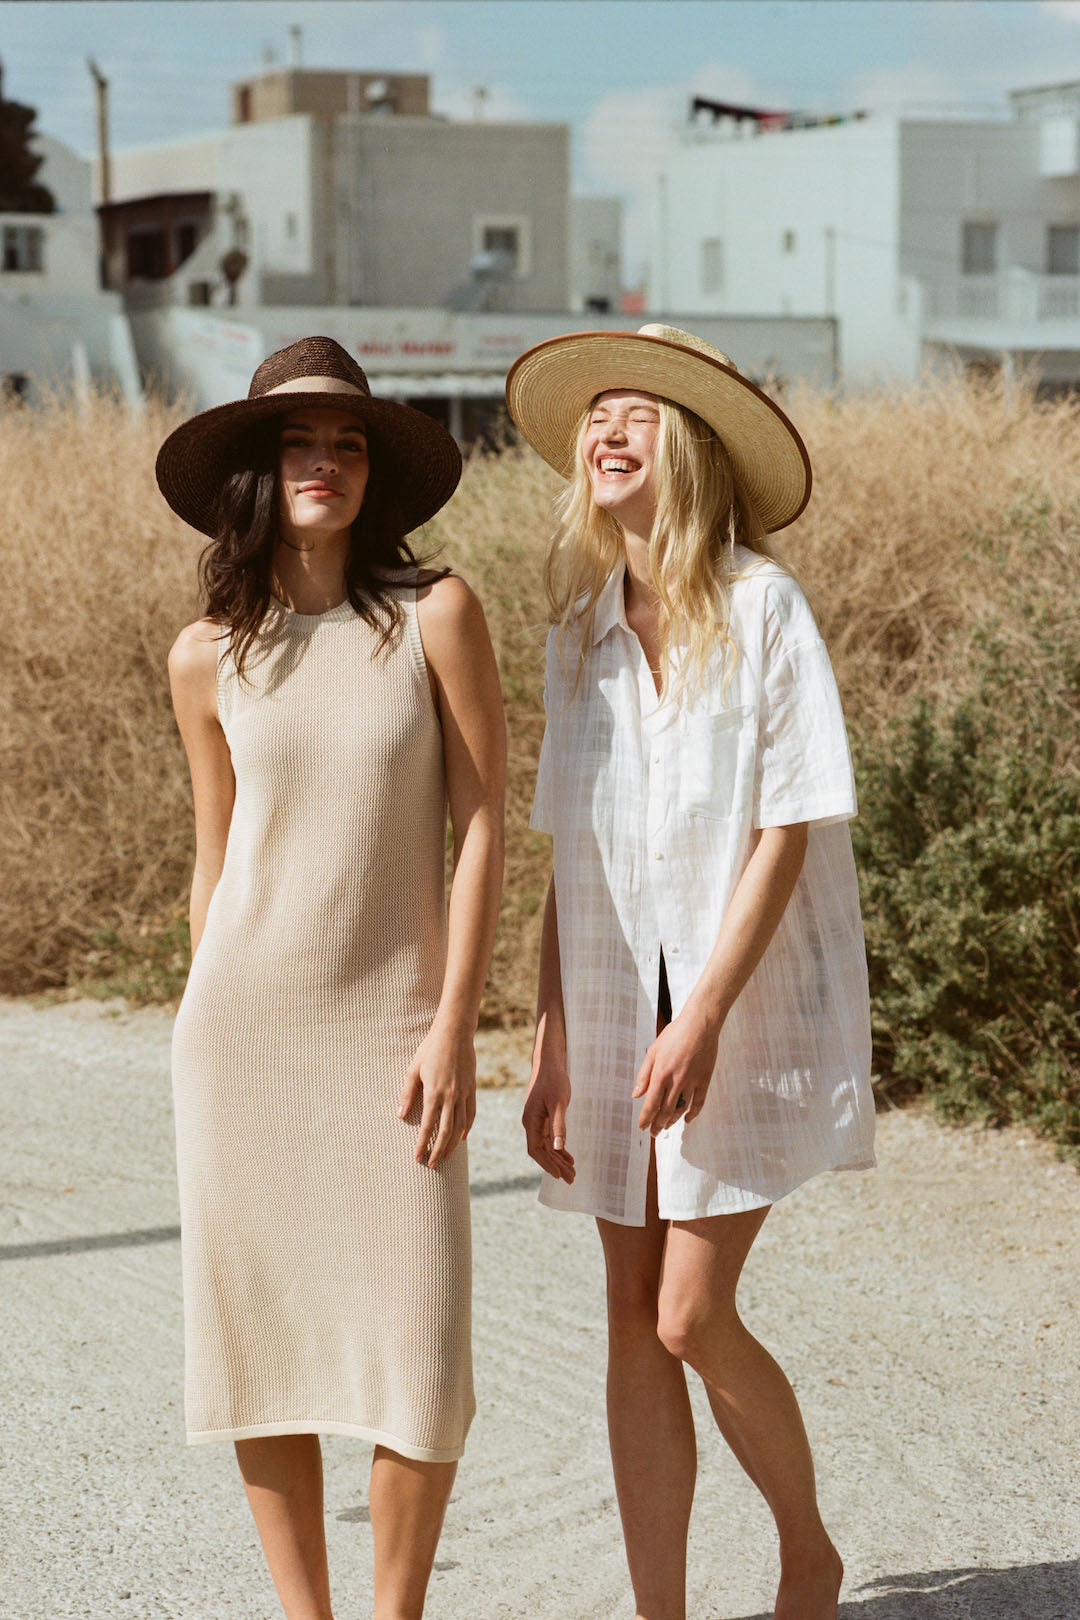 Women's Full Brimmed Hats with long hair - look 2